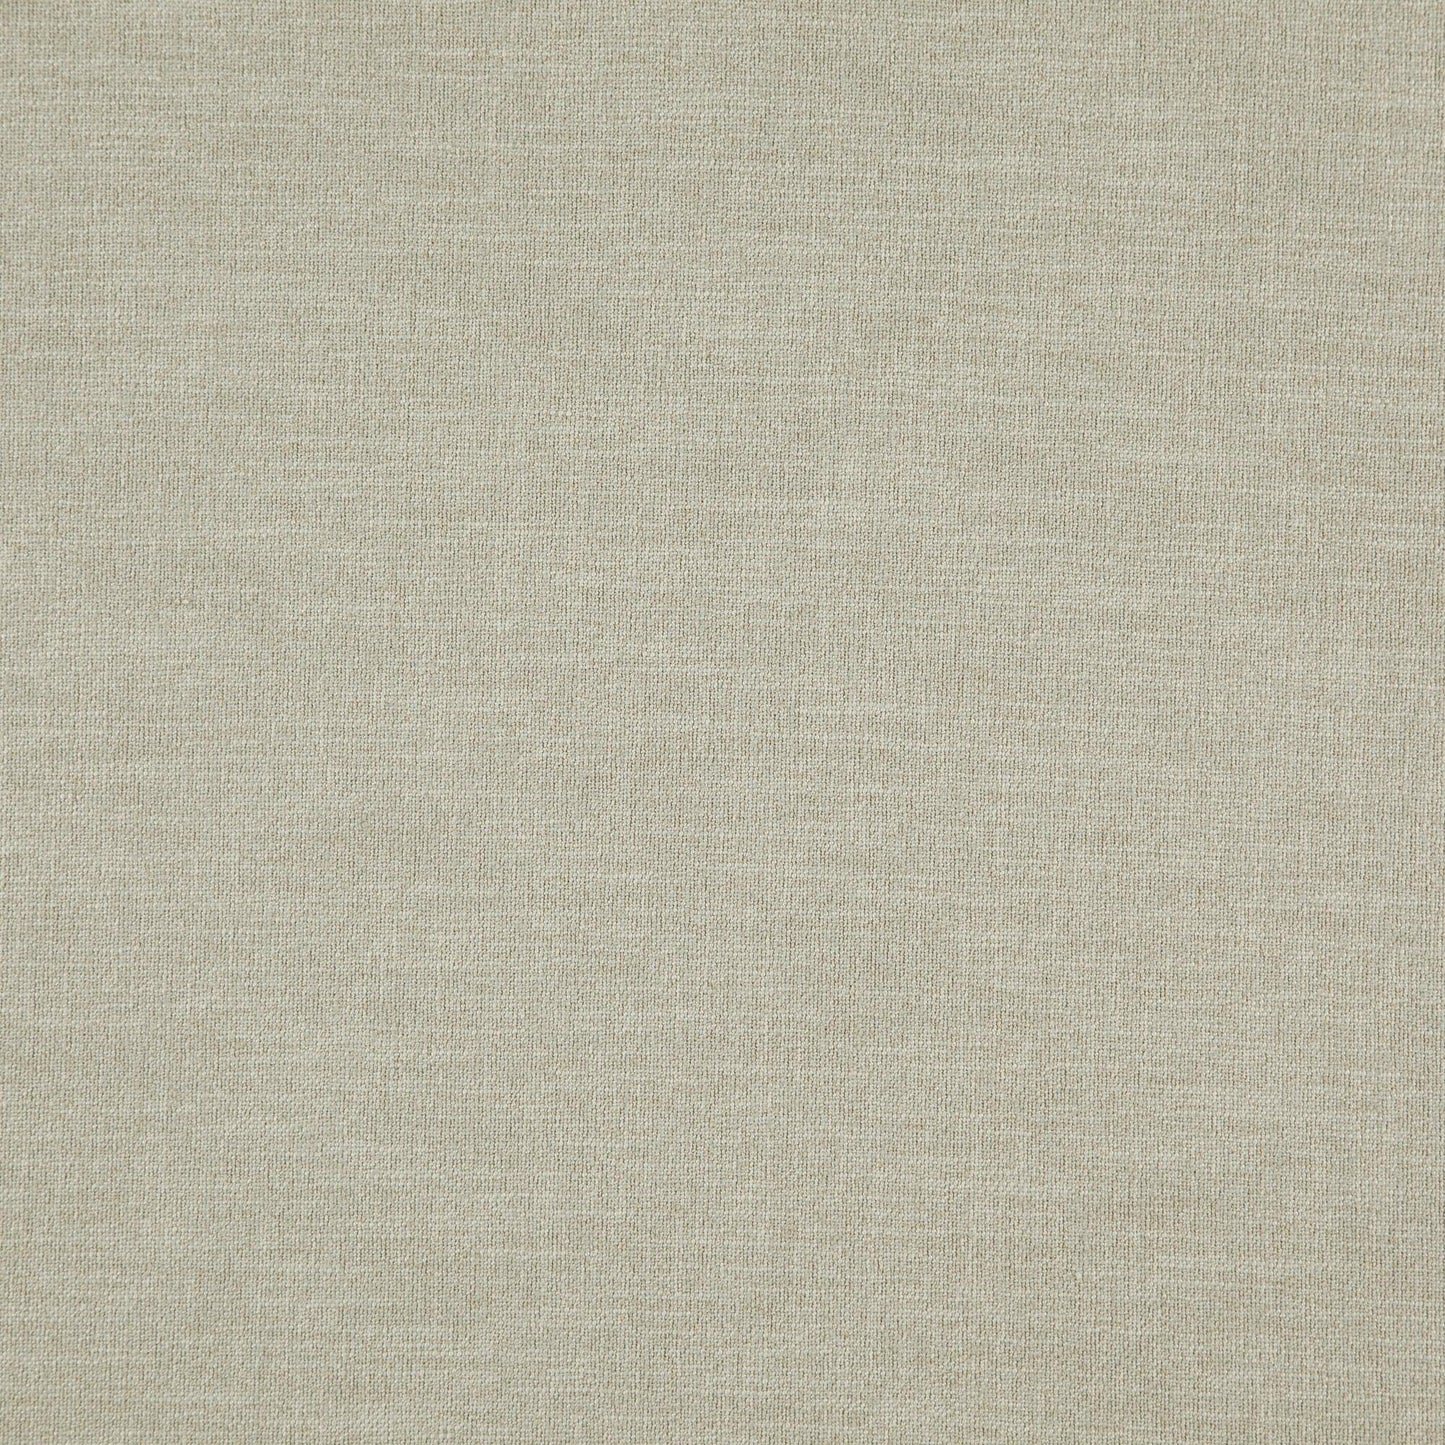 Upholstery Fabric Eco Friendly Bella Pale Taupe